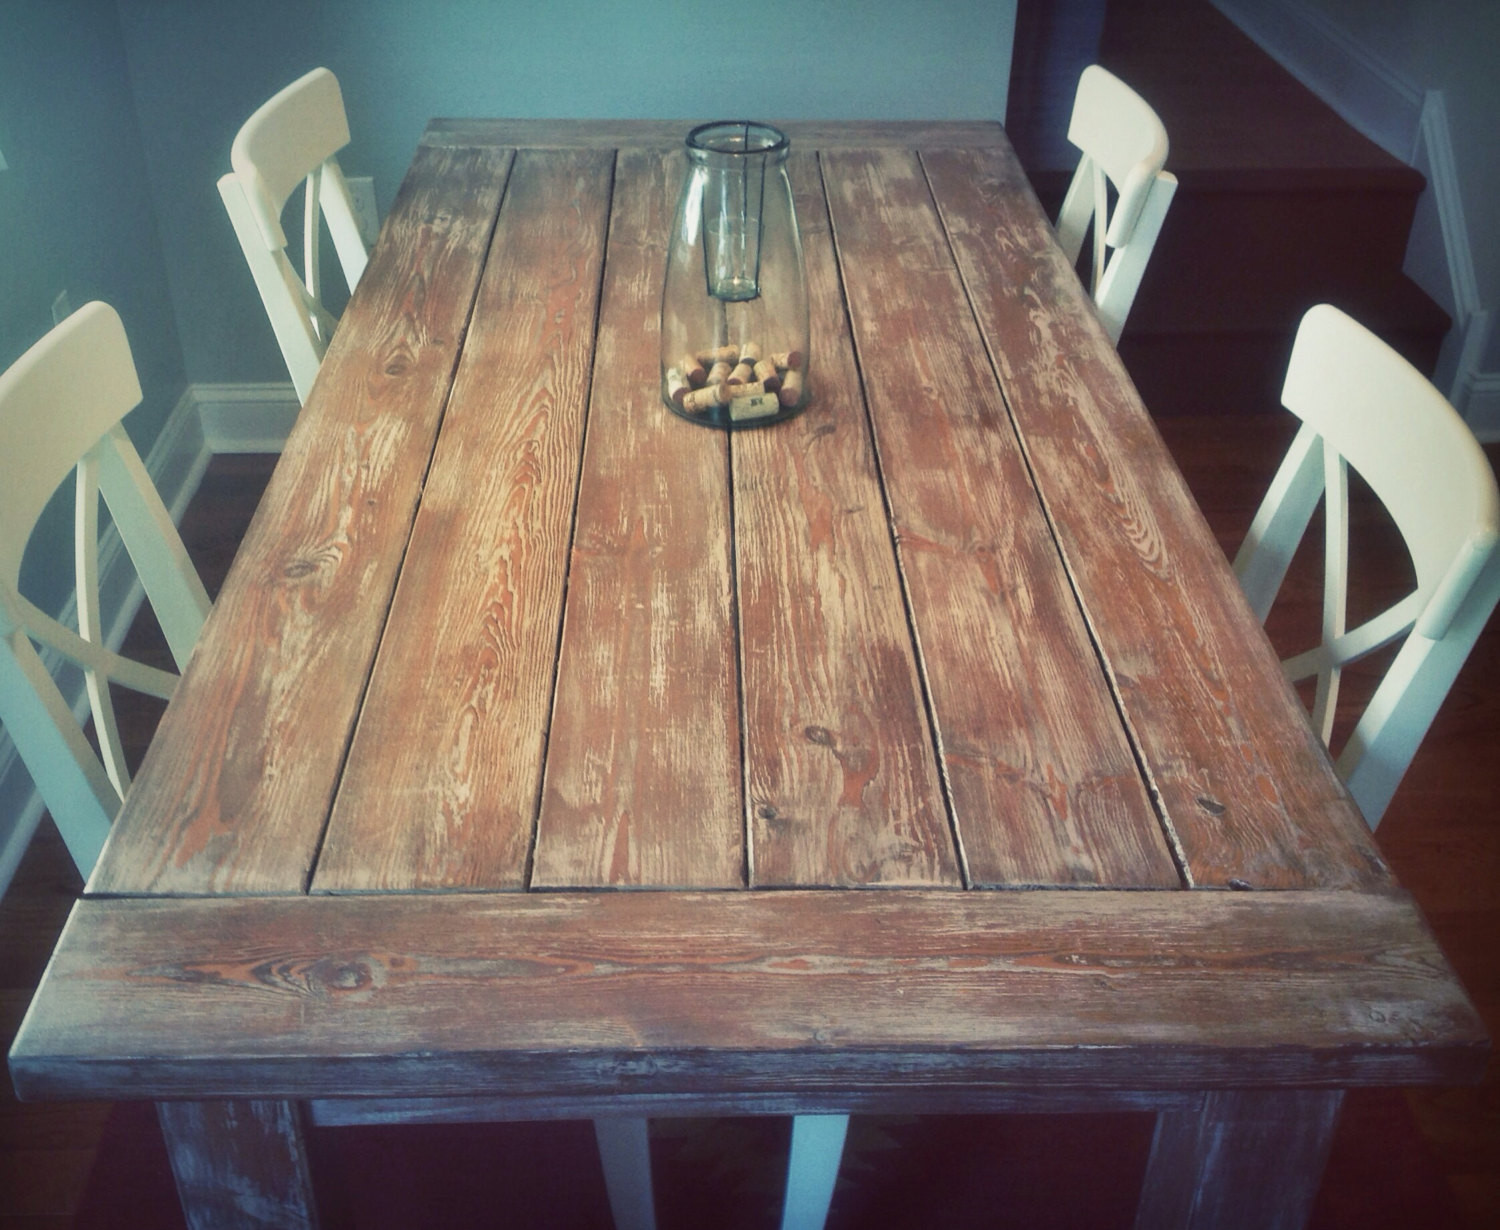 Rustic Farmhouse Kitchen Table
 Weathered Rustic Farmhouse Style Dining Table